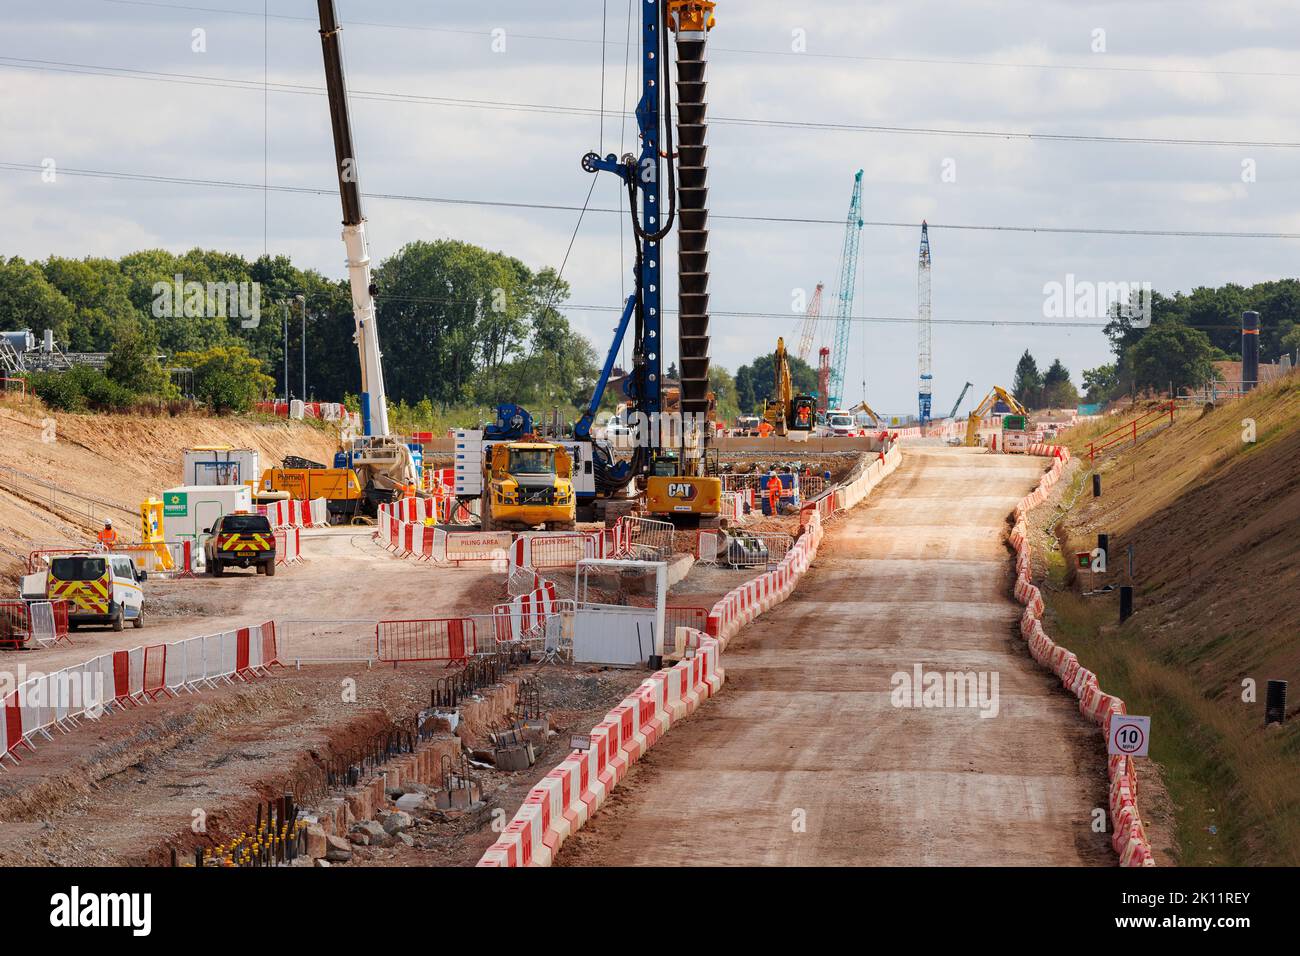 Construction of the HS2 Rail network taking place at Waste Lane near Berkswell, Warwickshire. The picture shows construction work near waste lane, looking towards Burton Green. Stock Photo